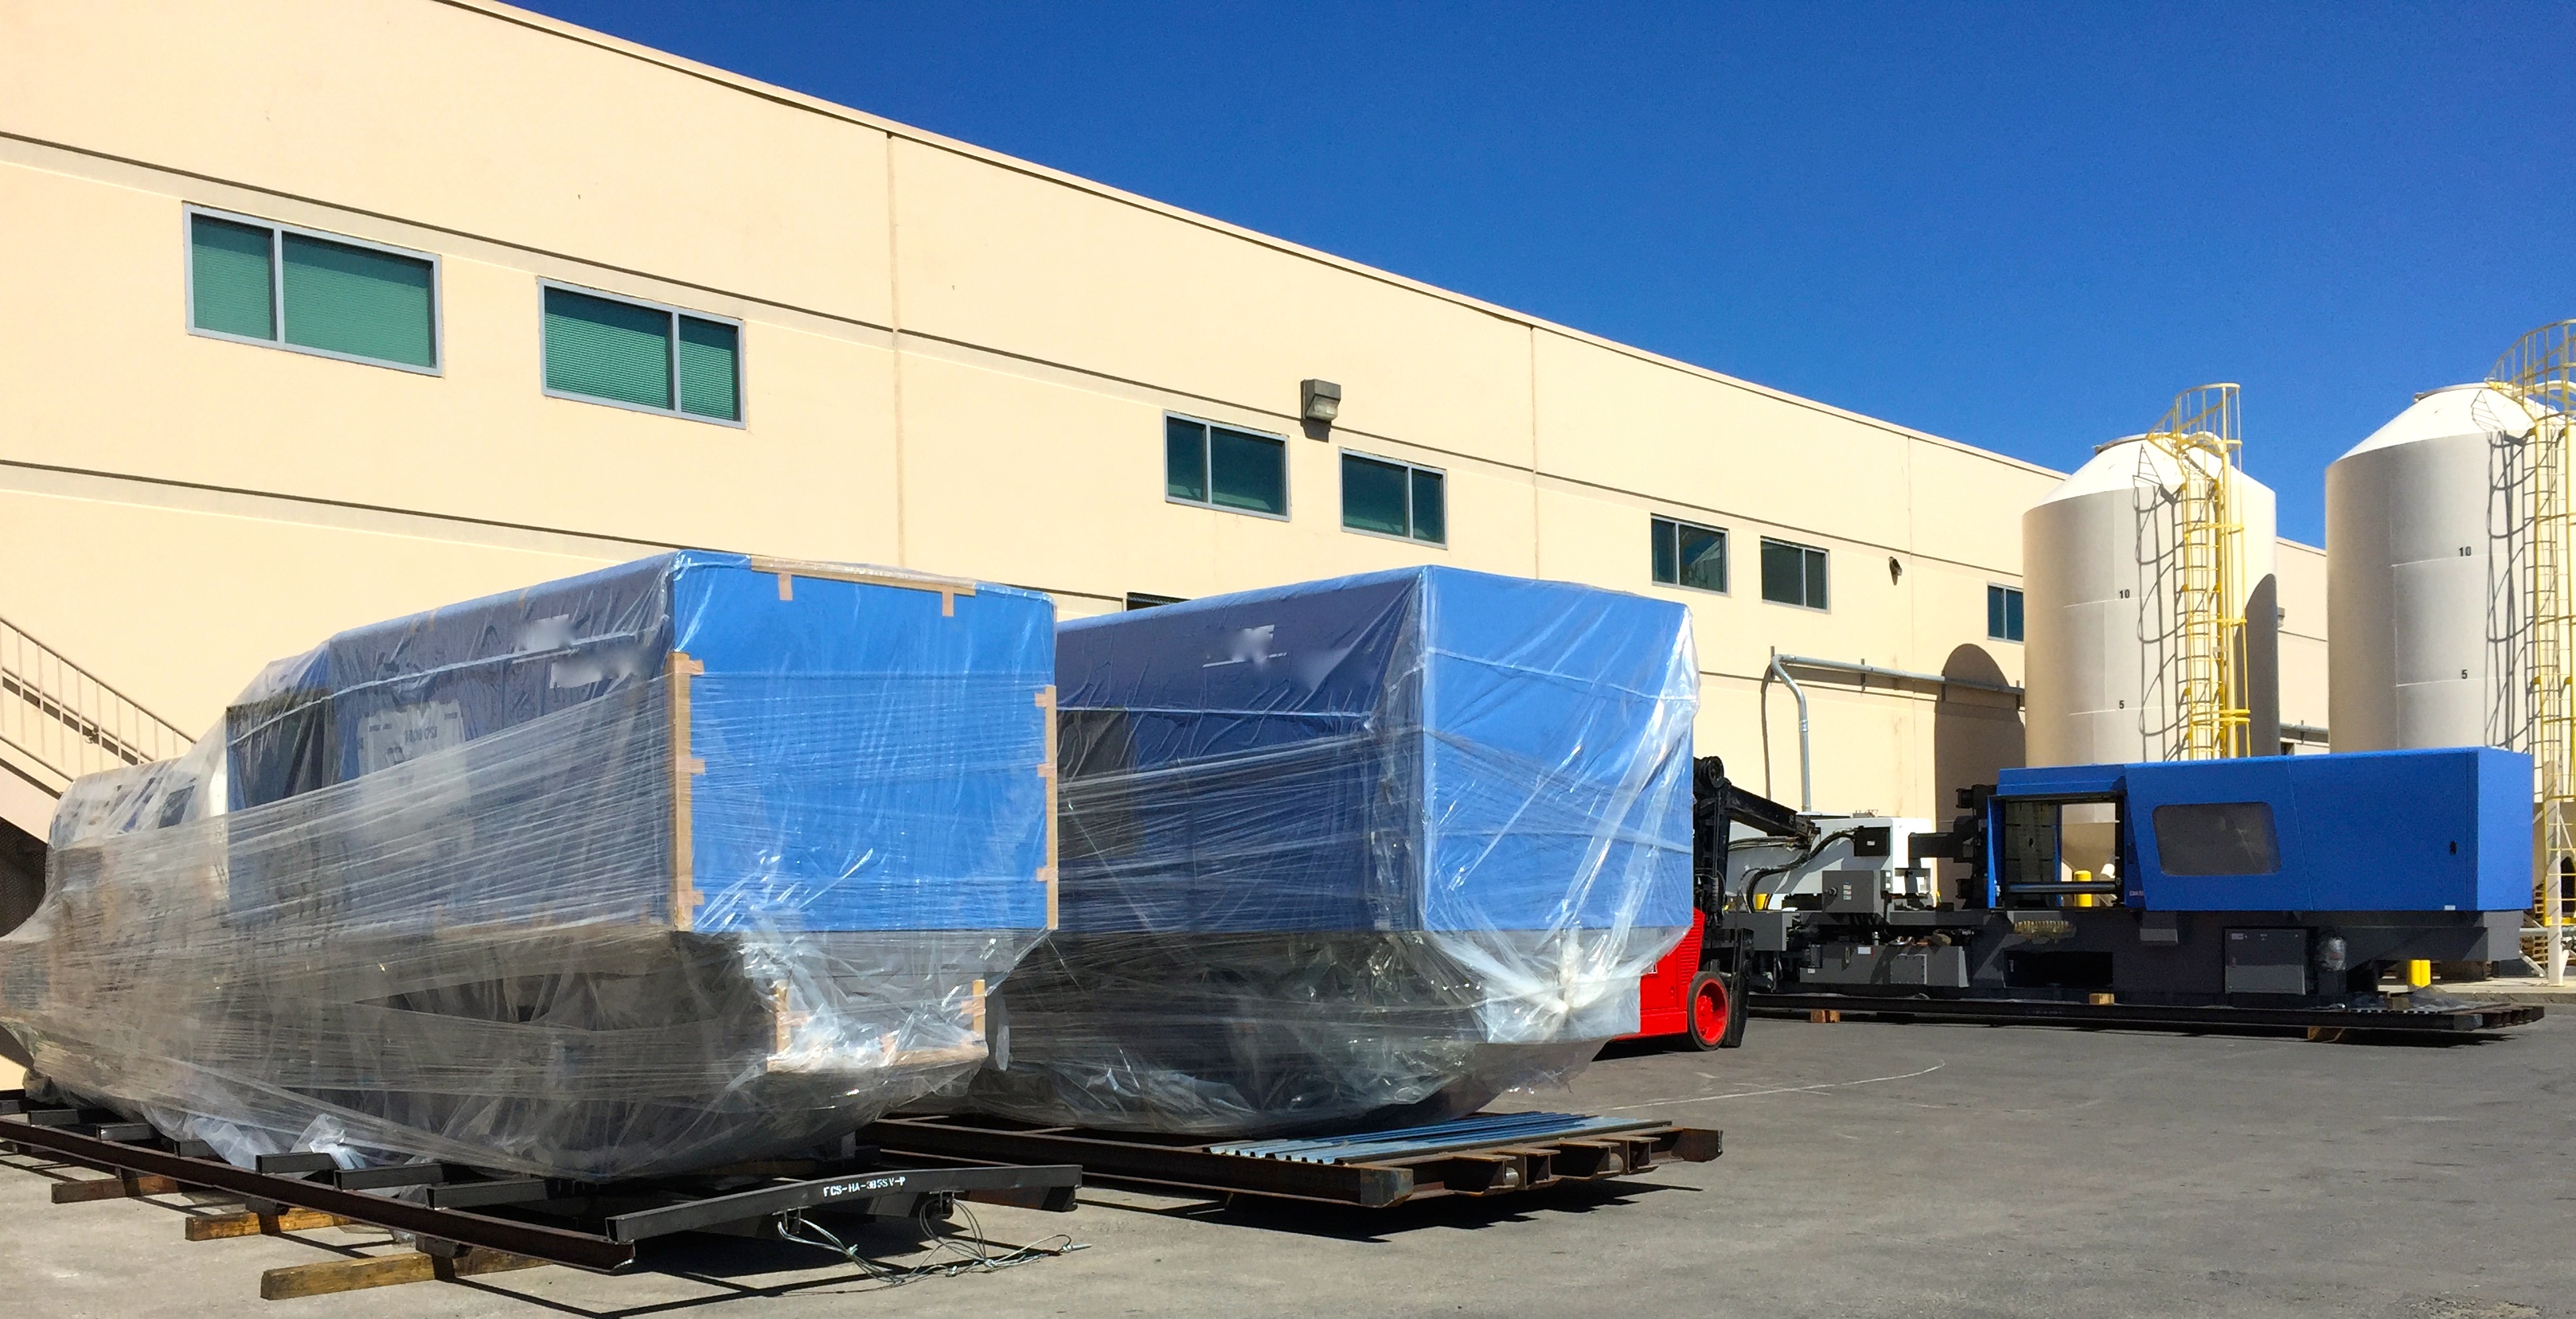 3 new additional state-of-the-art Injection presses ready for installation